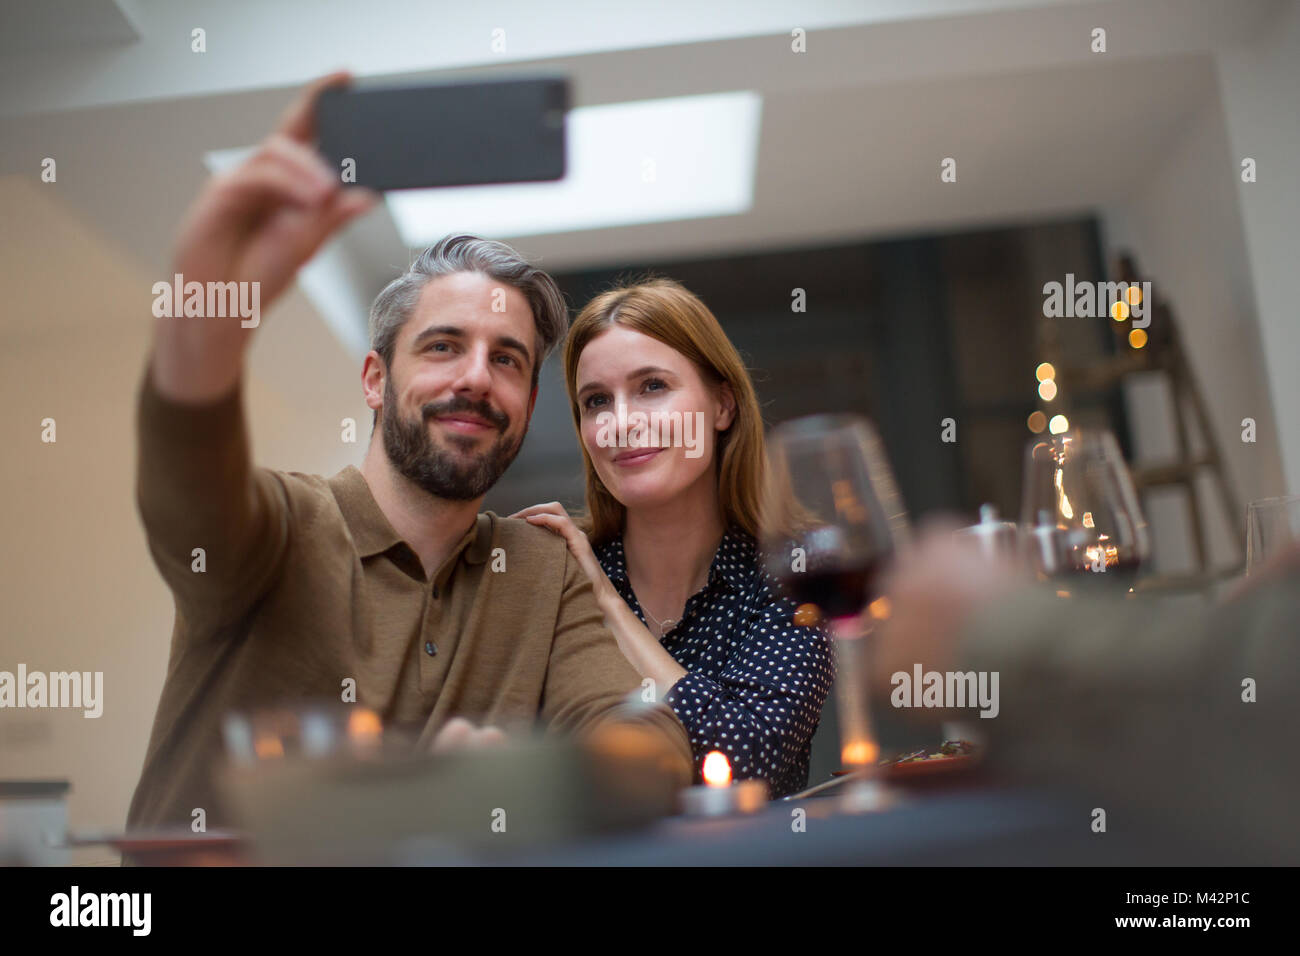 Couple taking a selfie at a celebration Stock Photo